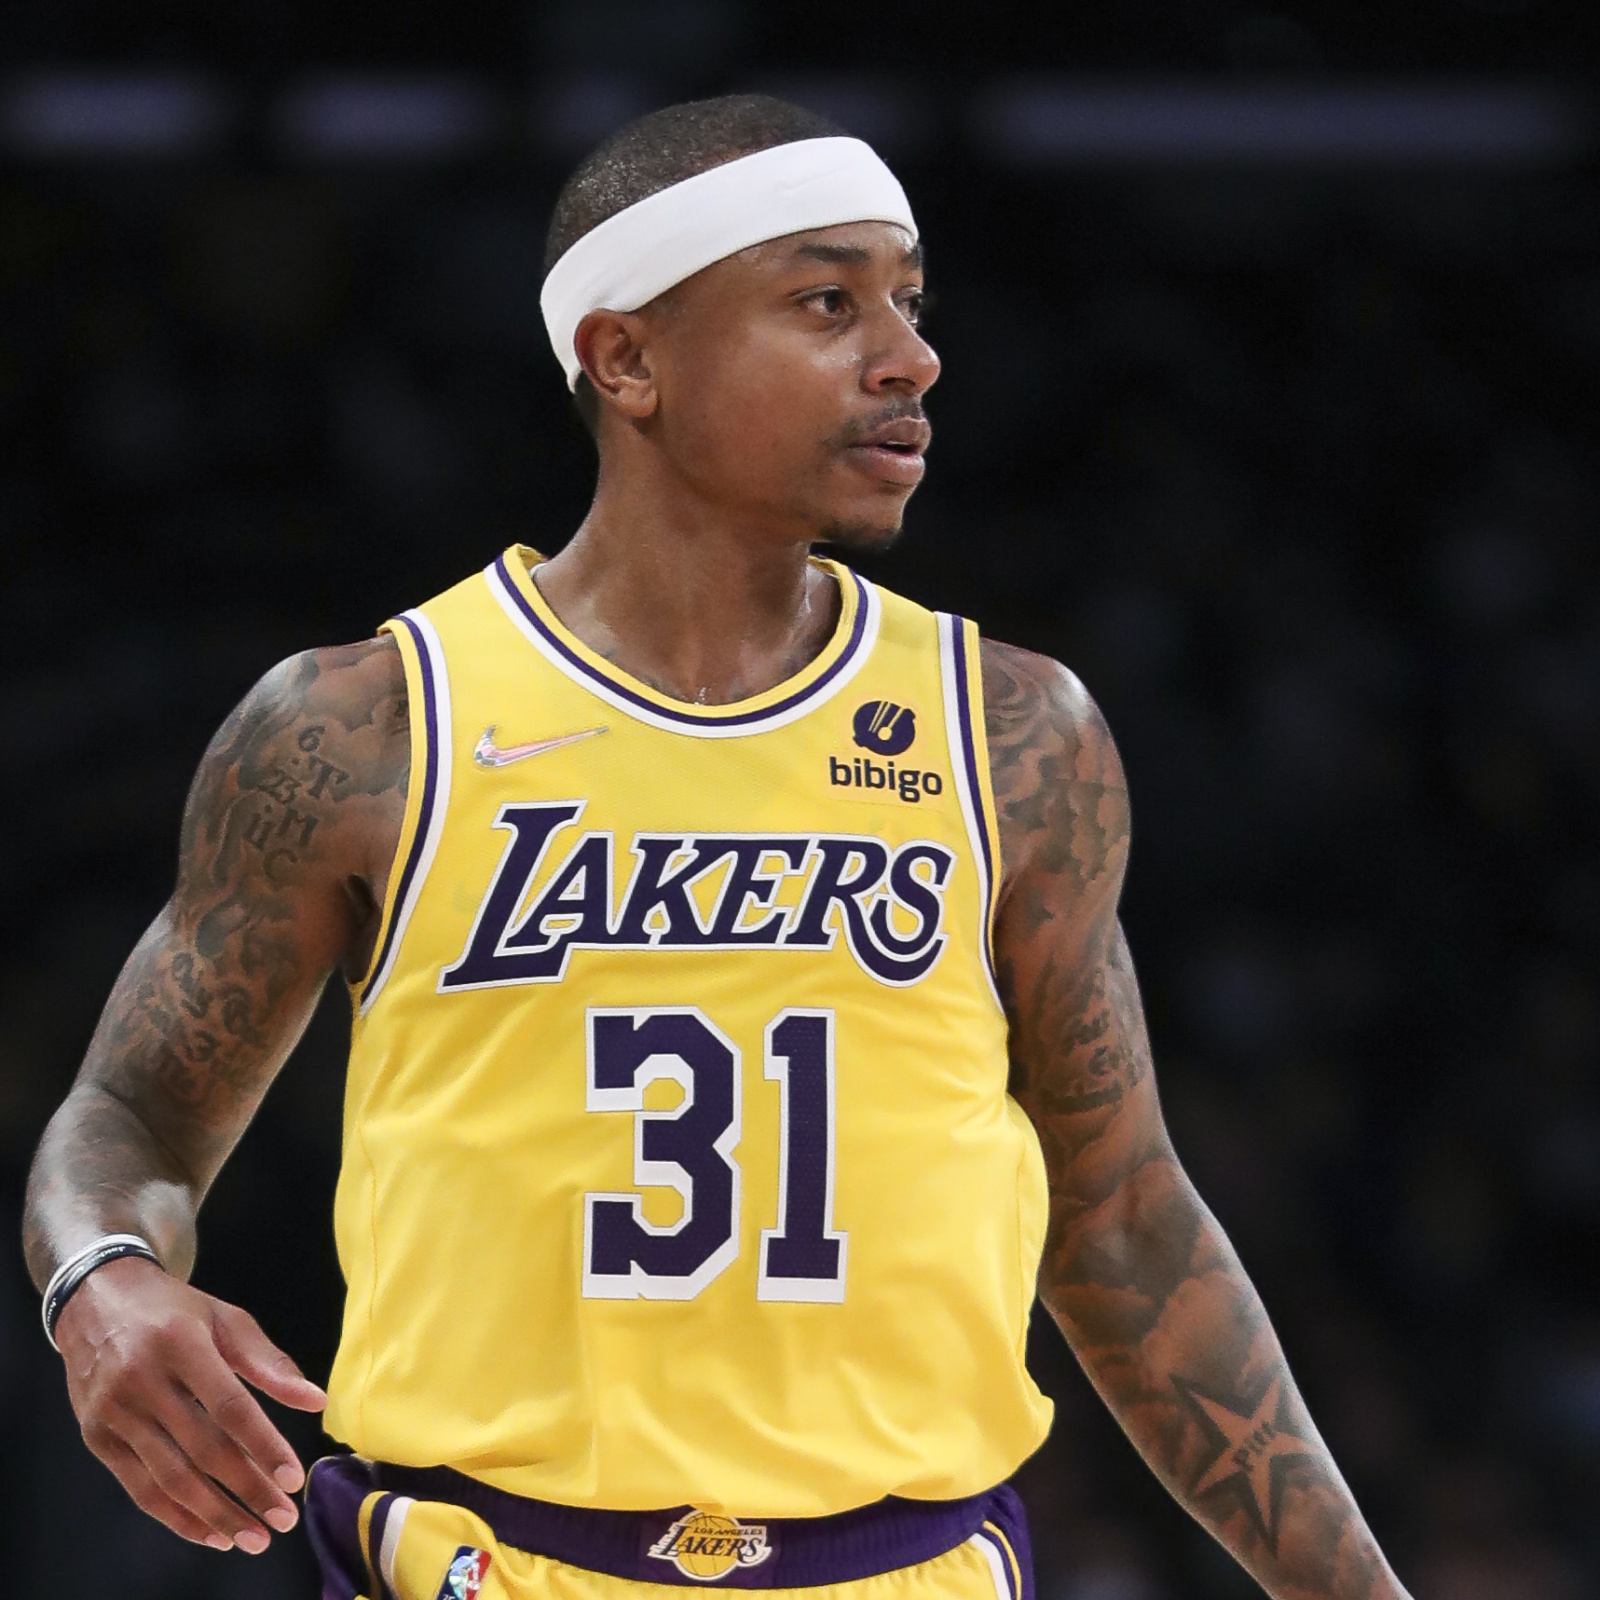 Lakers News: Isaiah Thomas Switches to Jersey No. 3